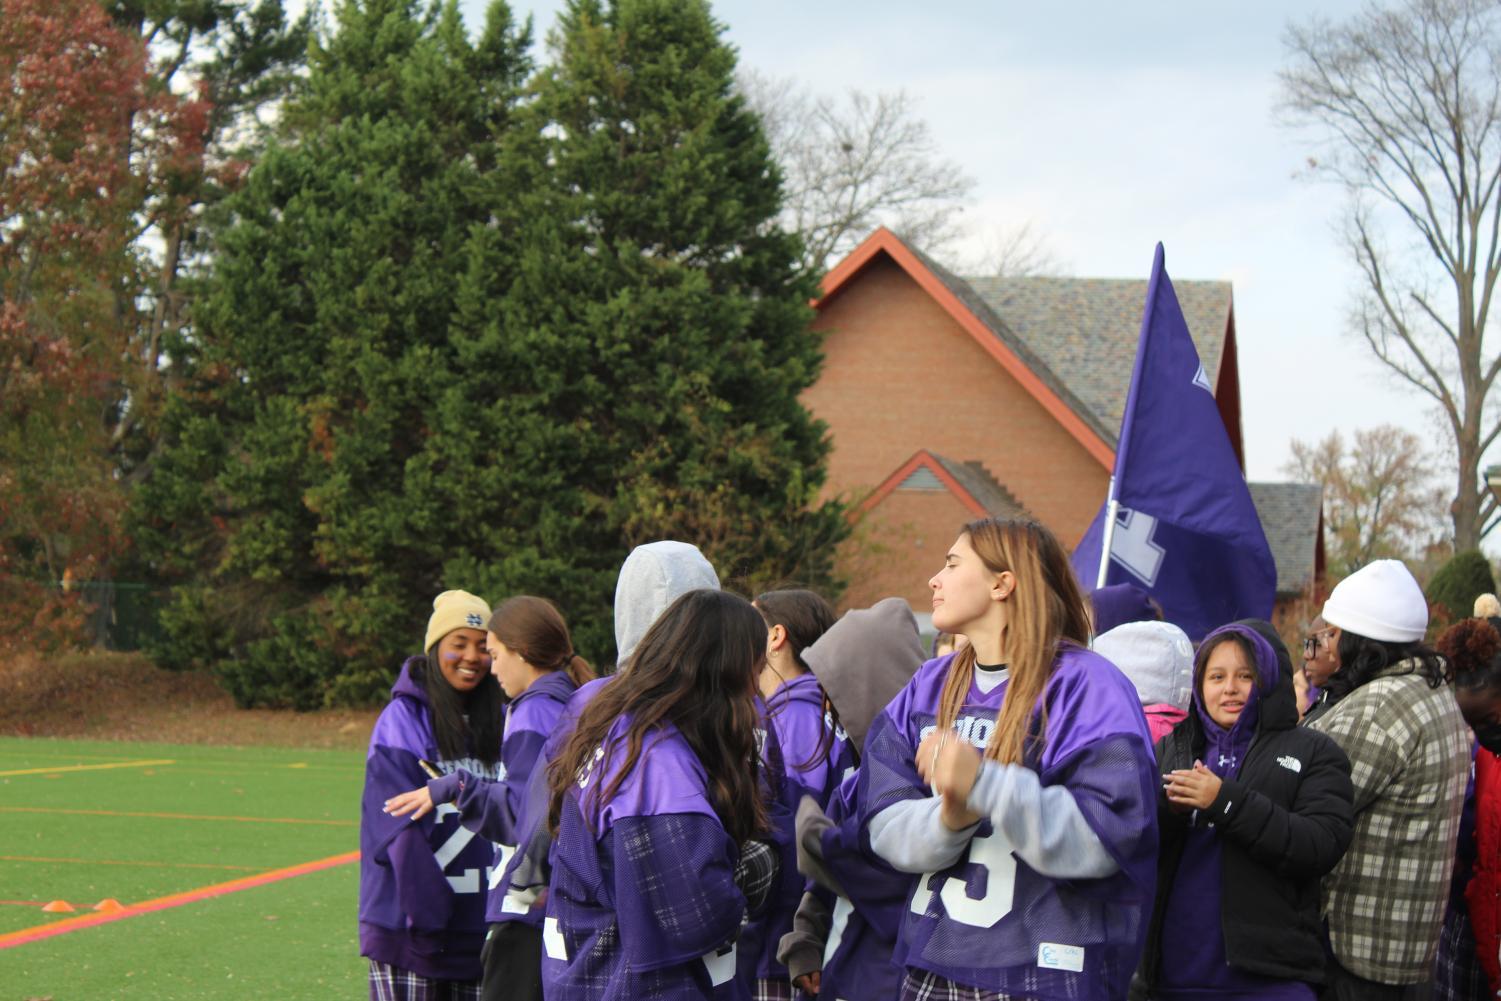 Seniors and sophomores cheering for the Purple Team.